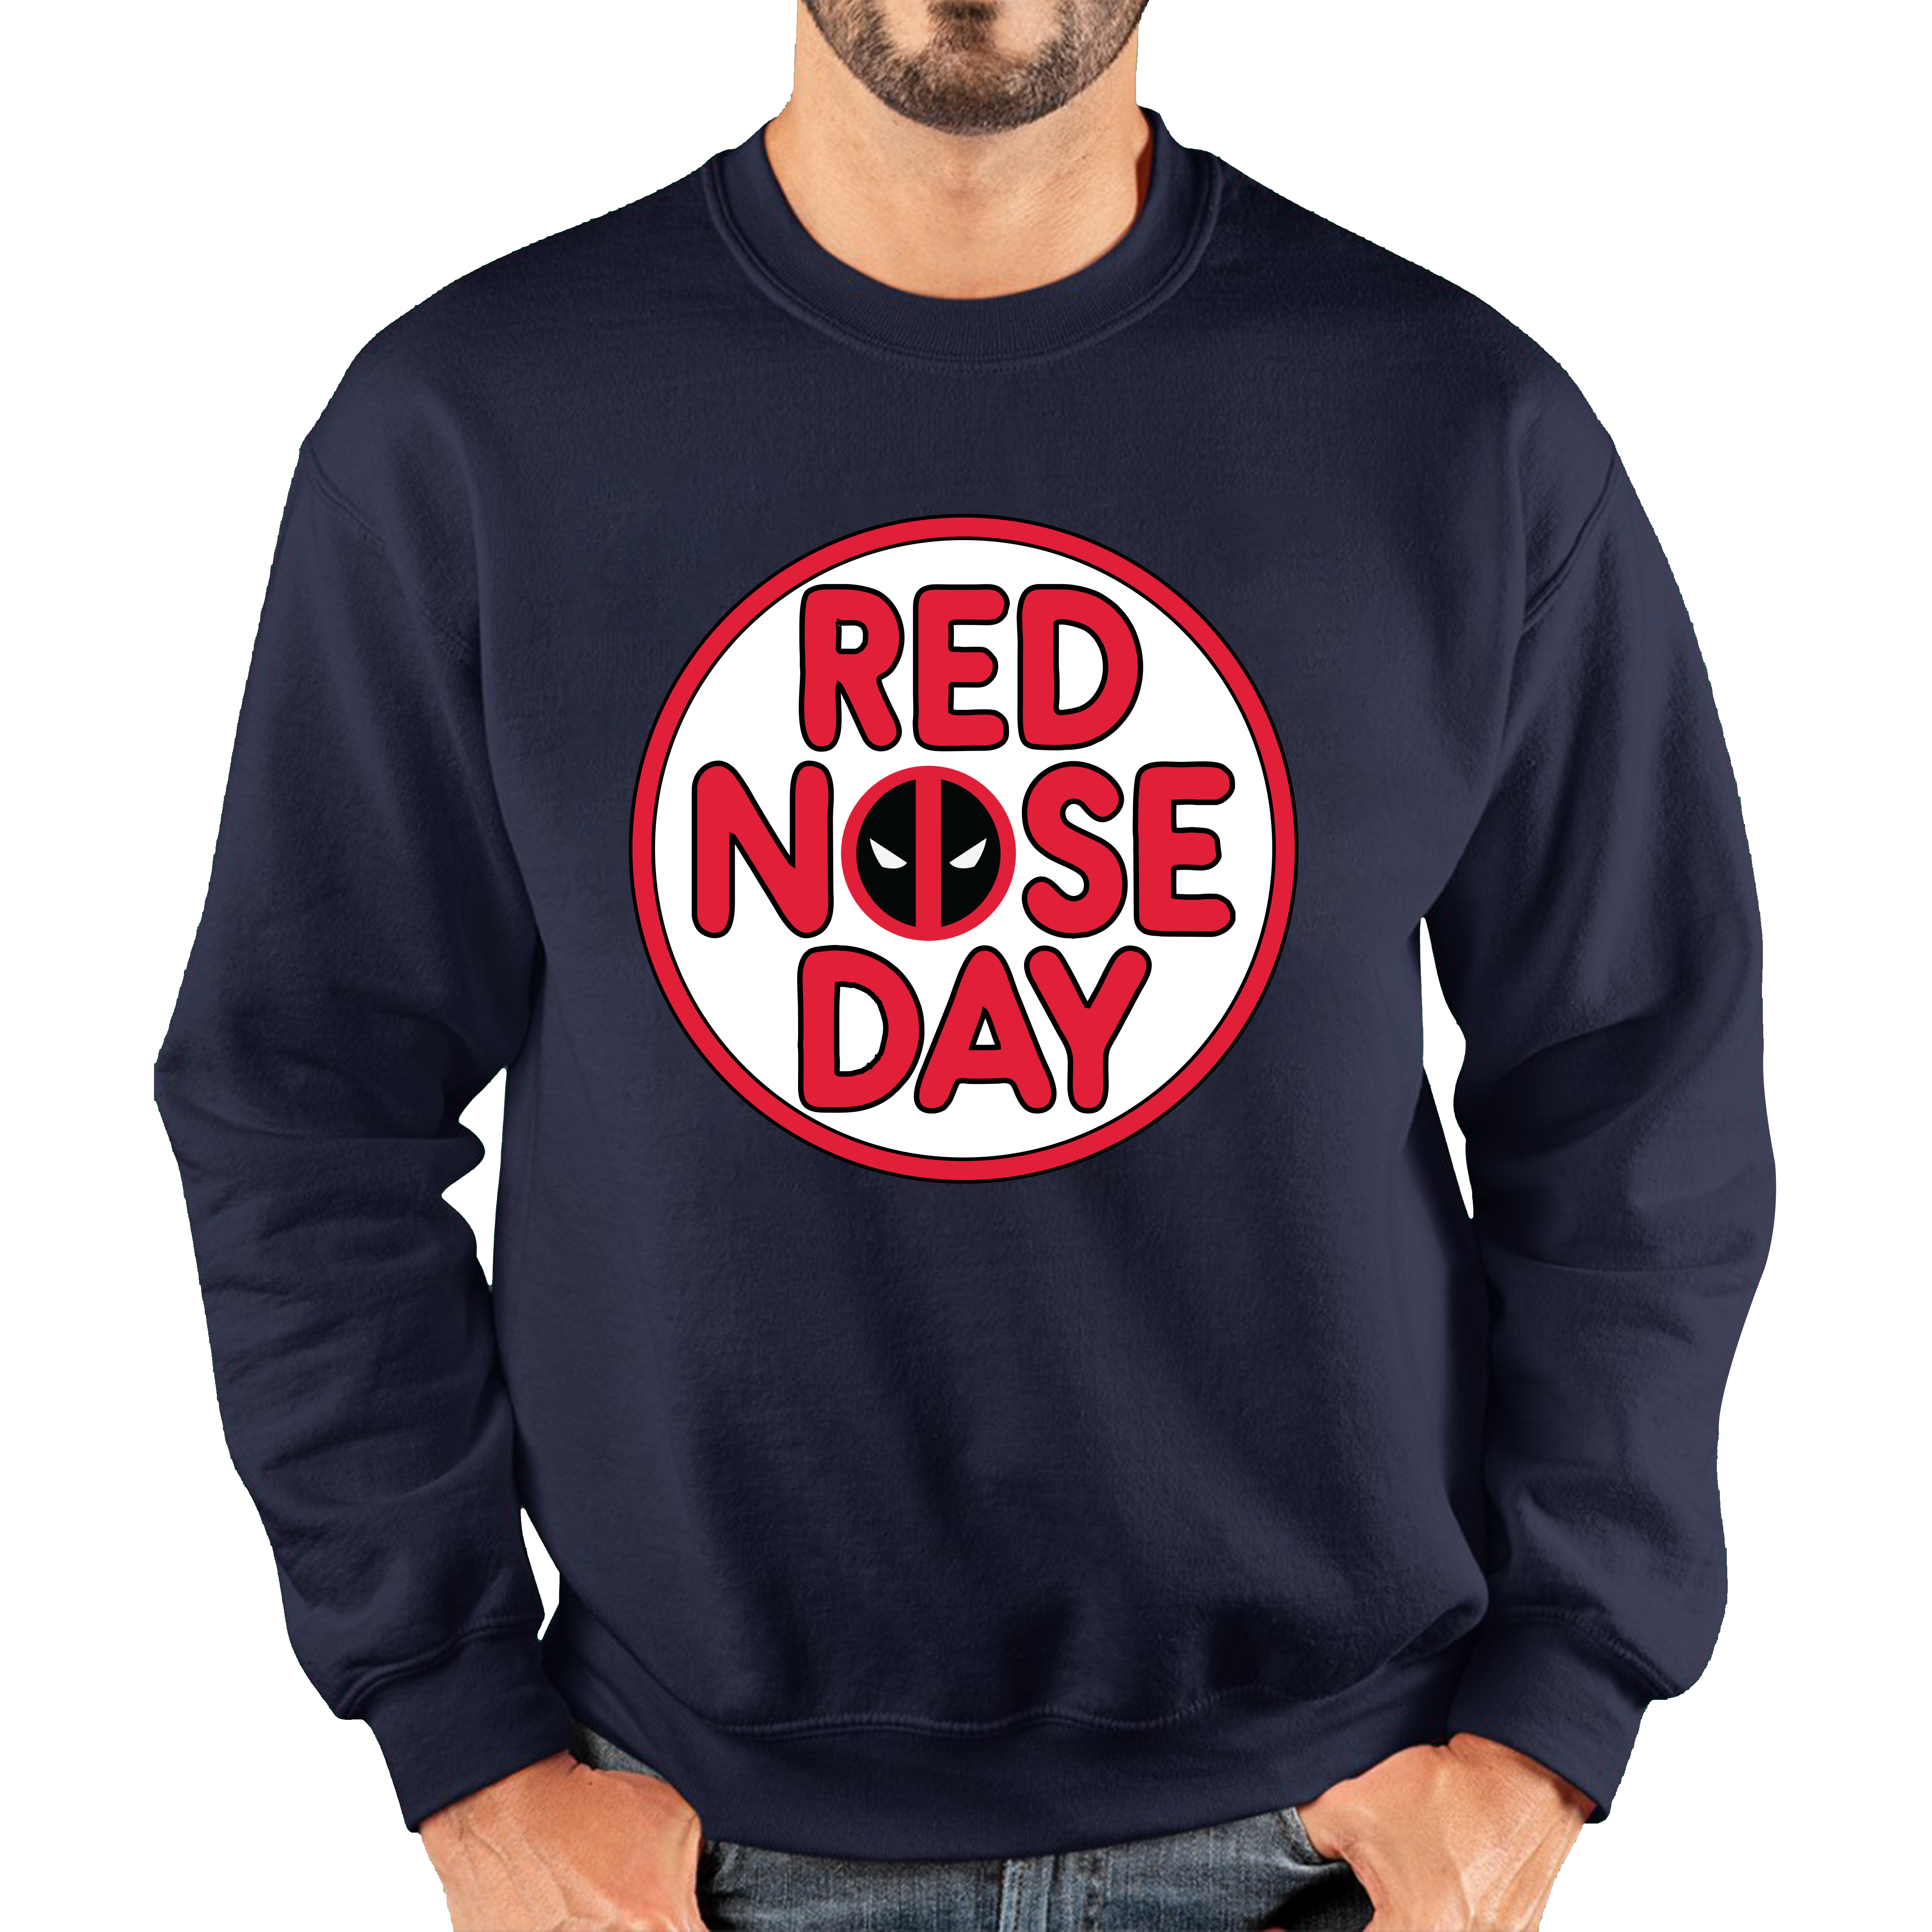 Deadpool Red Nose Day Adult Sweatshirt. 50% Goes To Charity